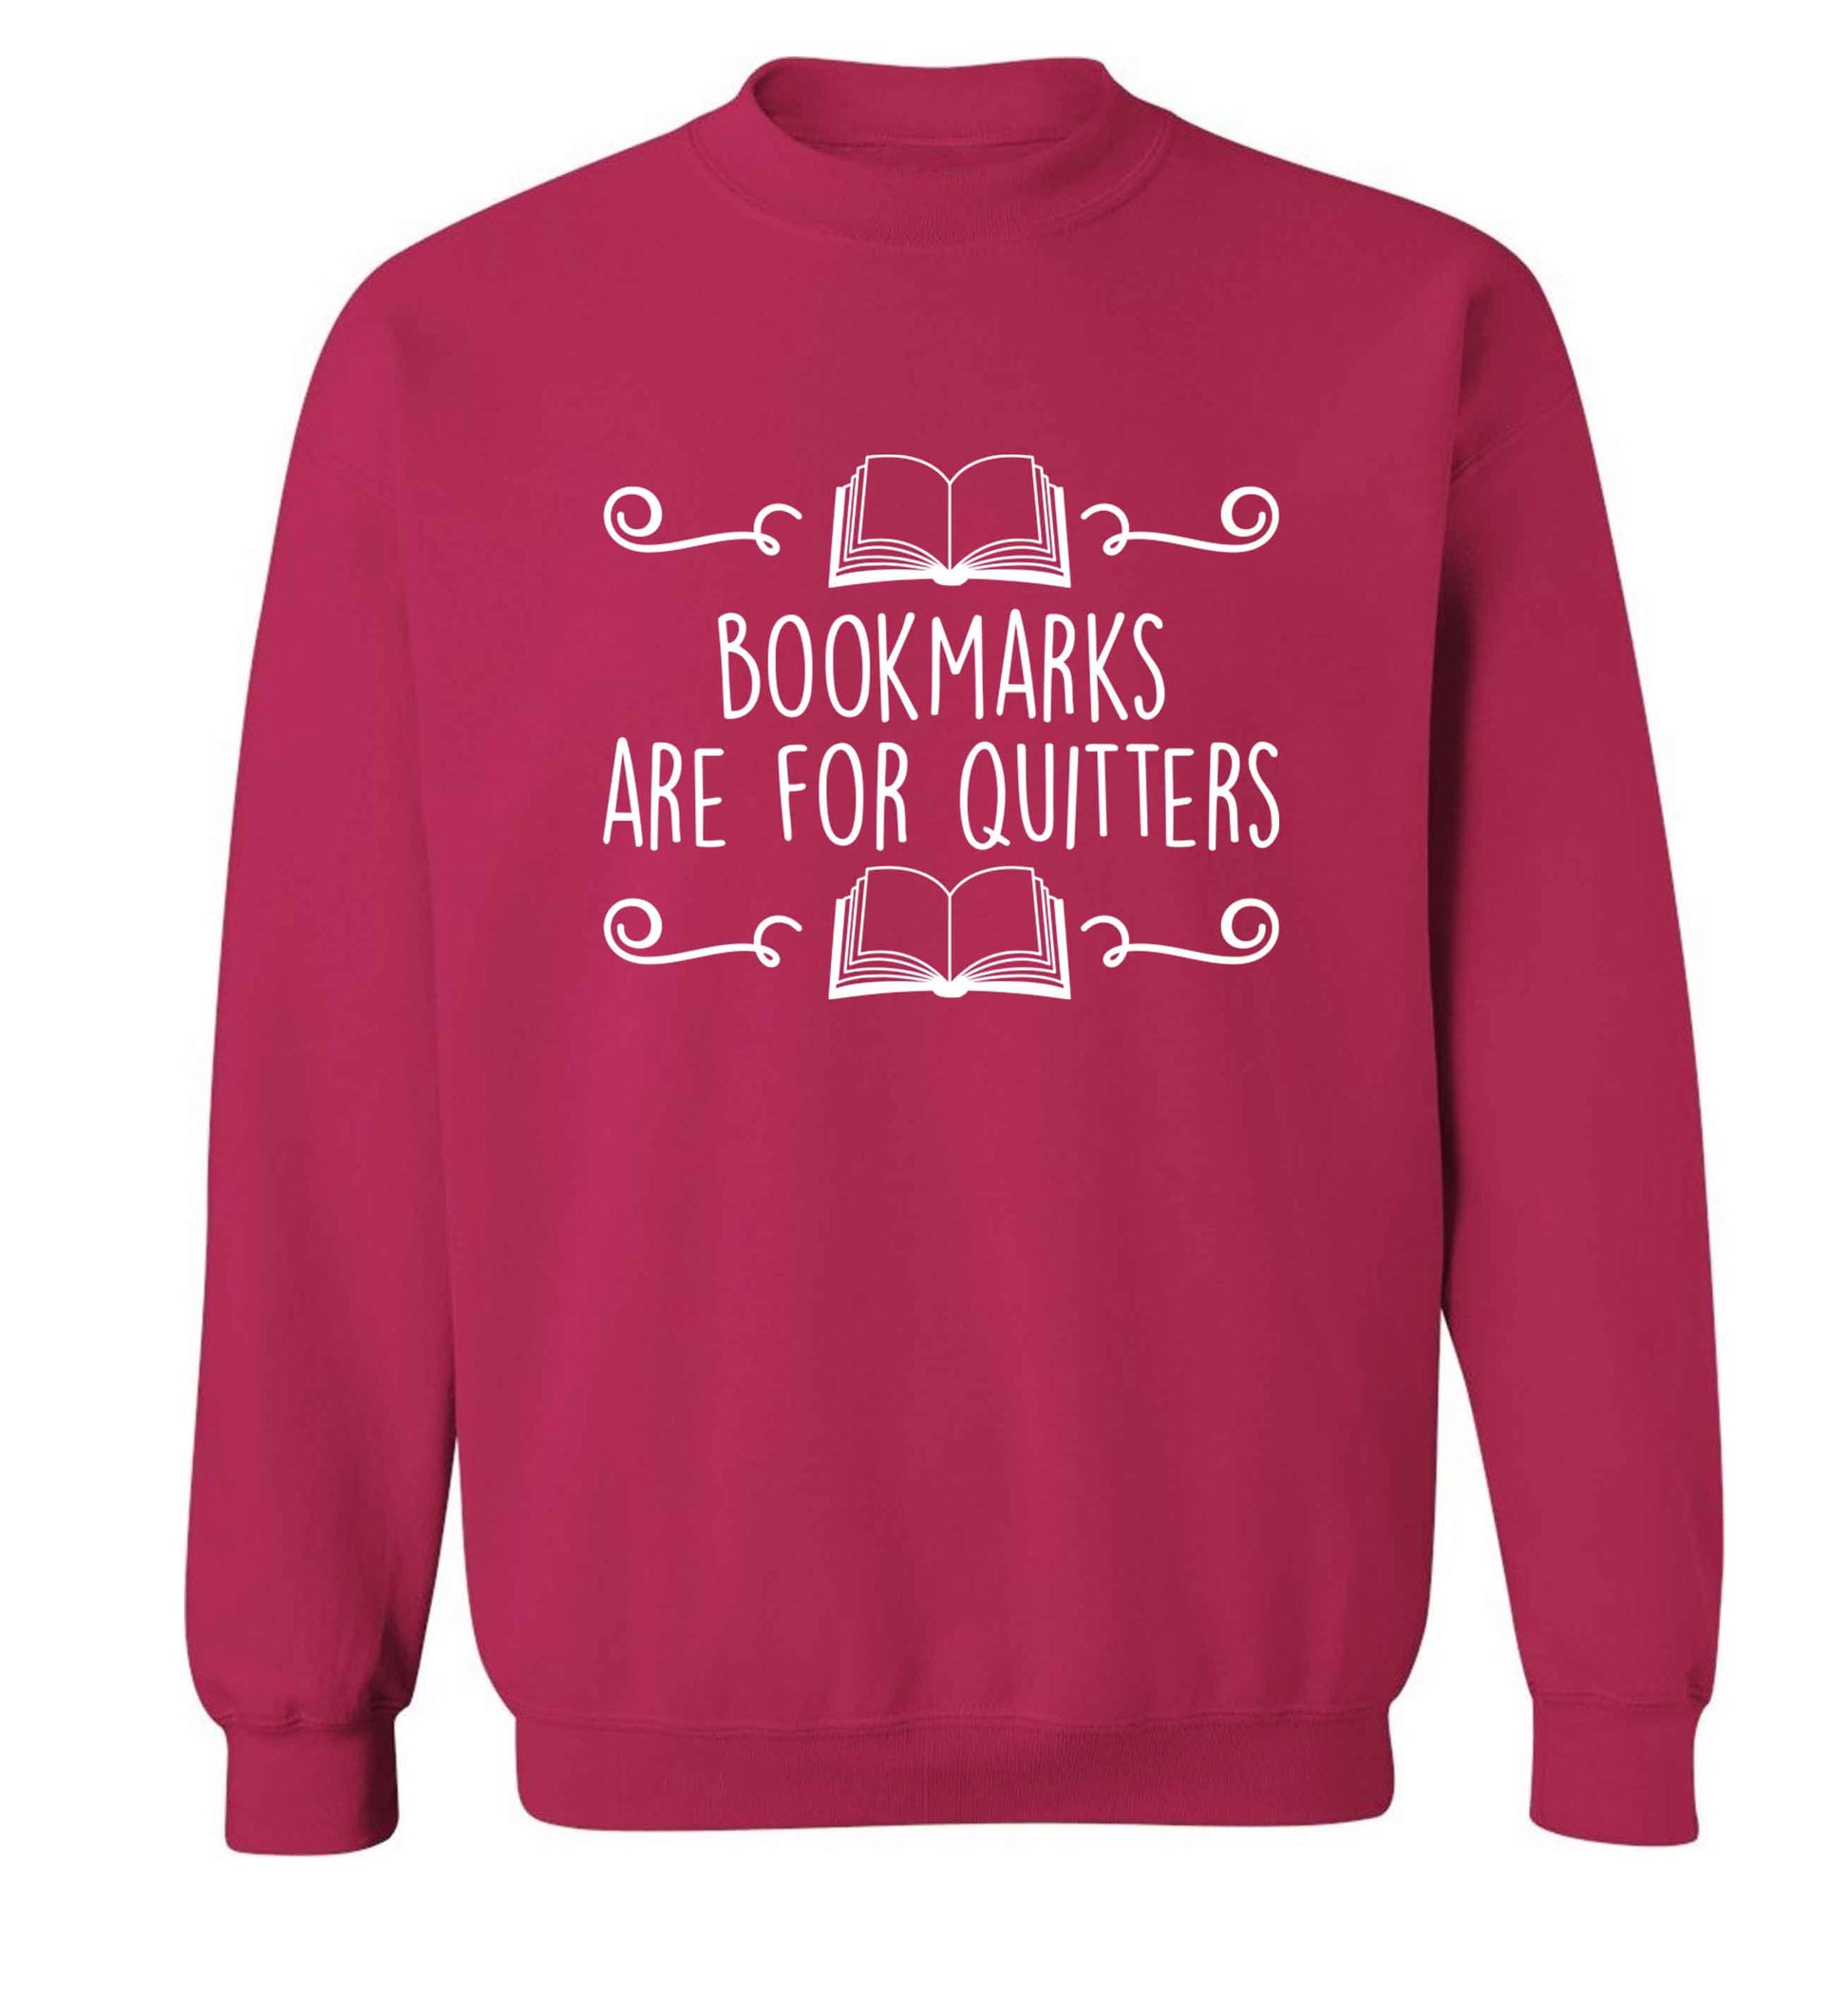 Bookmarks are for quitters adult's unisex pink sweater 2XL